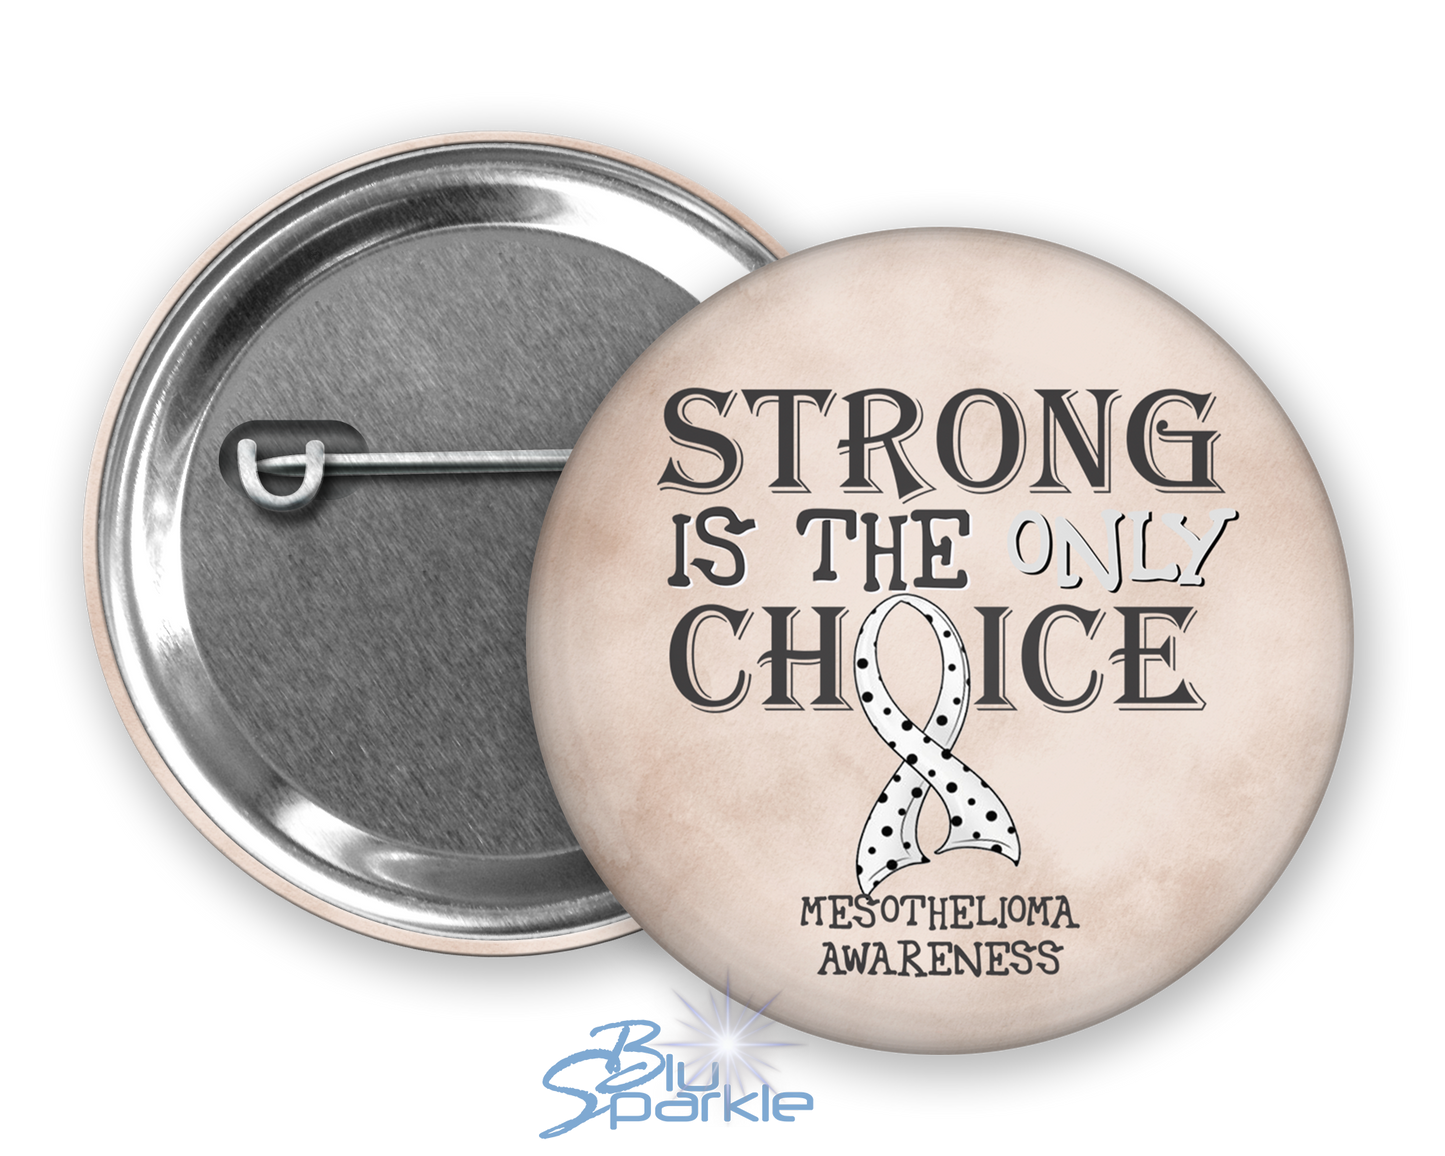 Strong is the Only Choice -Mesothelioma Awareness Pinback Button |x|